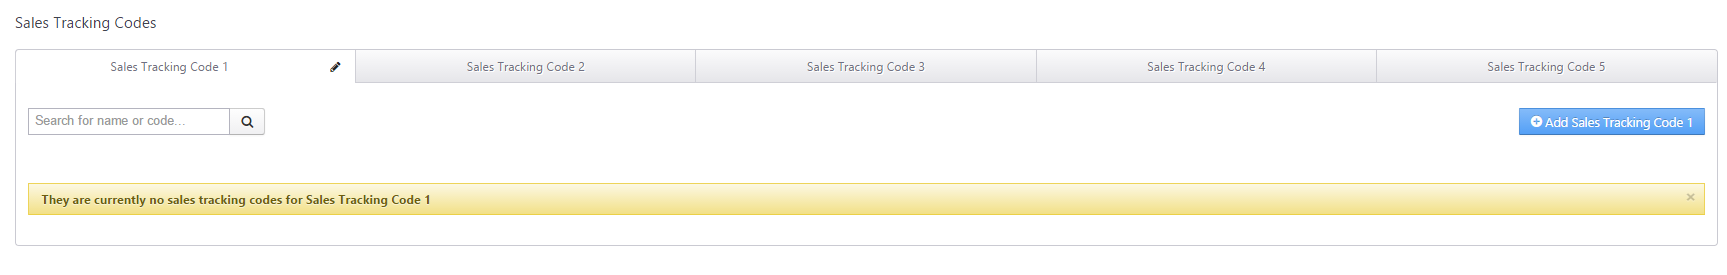 Configuring_Sales_Tracking_Codes_1.png